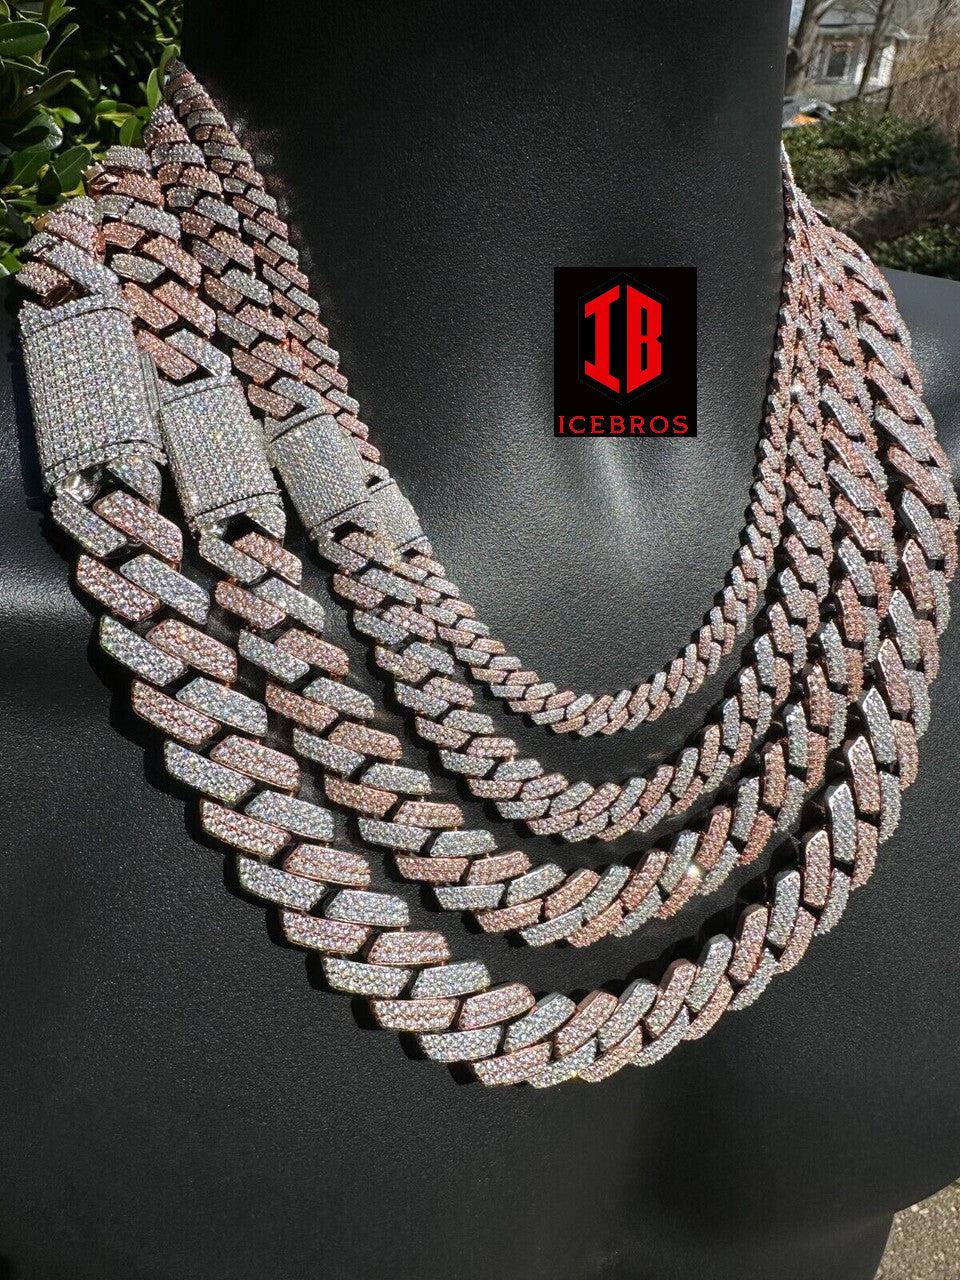 Rose Gold Miami Necklace Cuban Link Chain on Display Box with a Different Angle